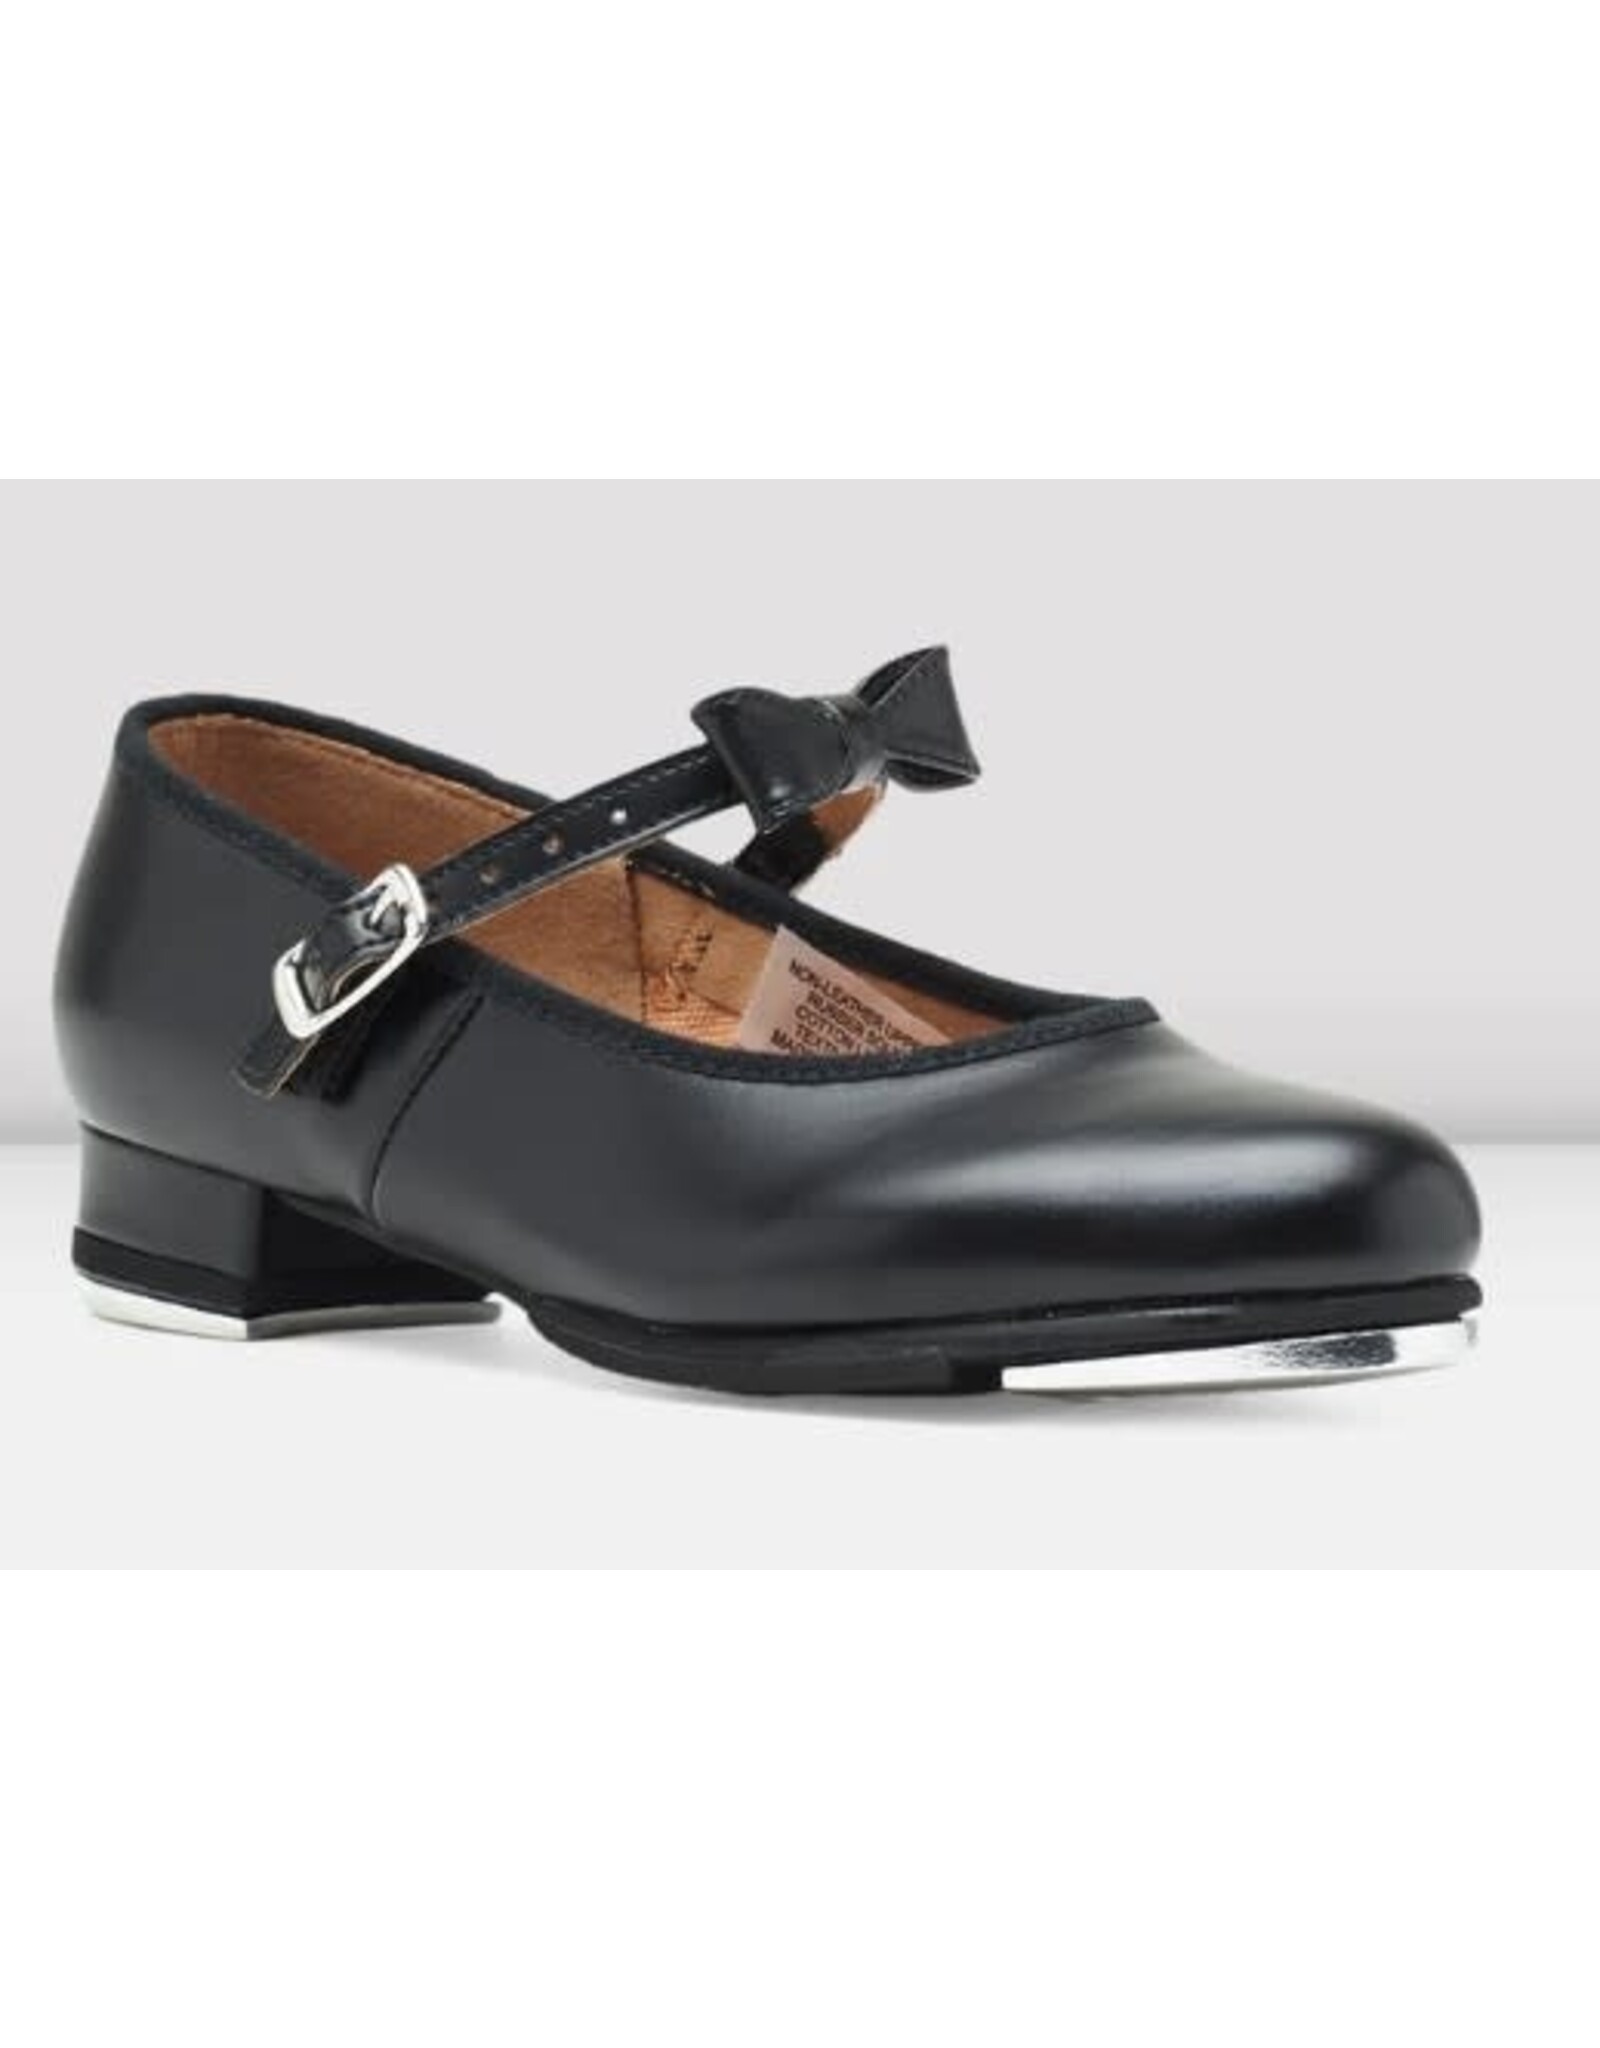 Ladies Merry Jane Tap Shoes by Bloch -S0352L